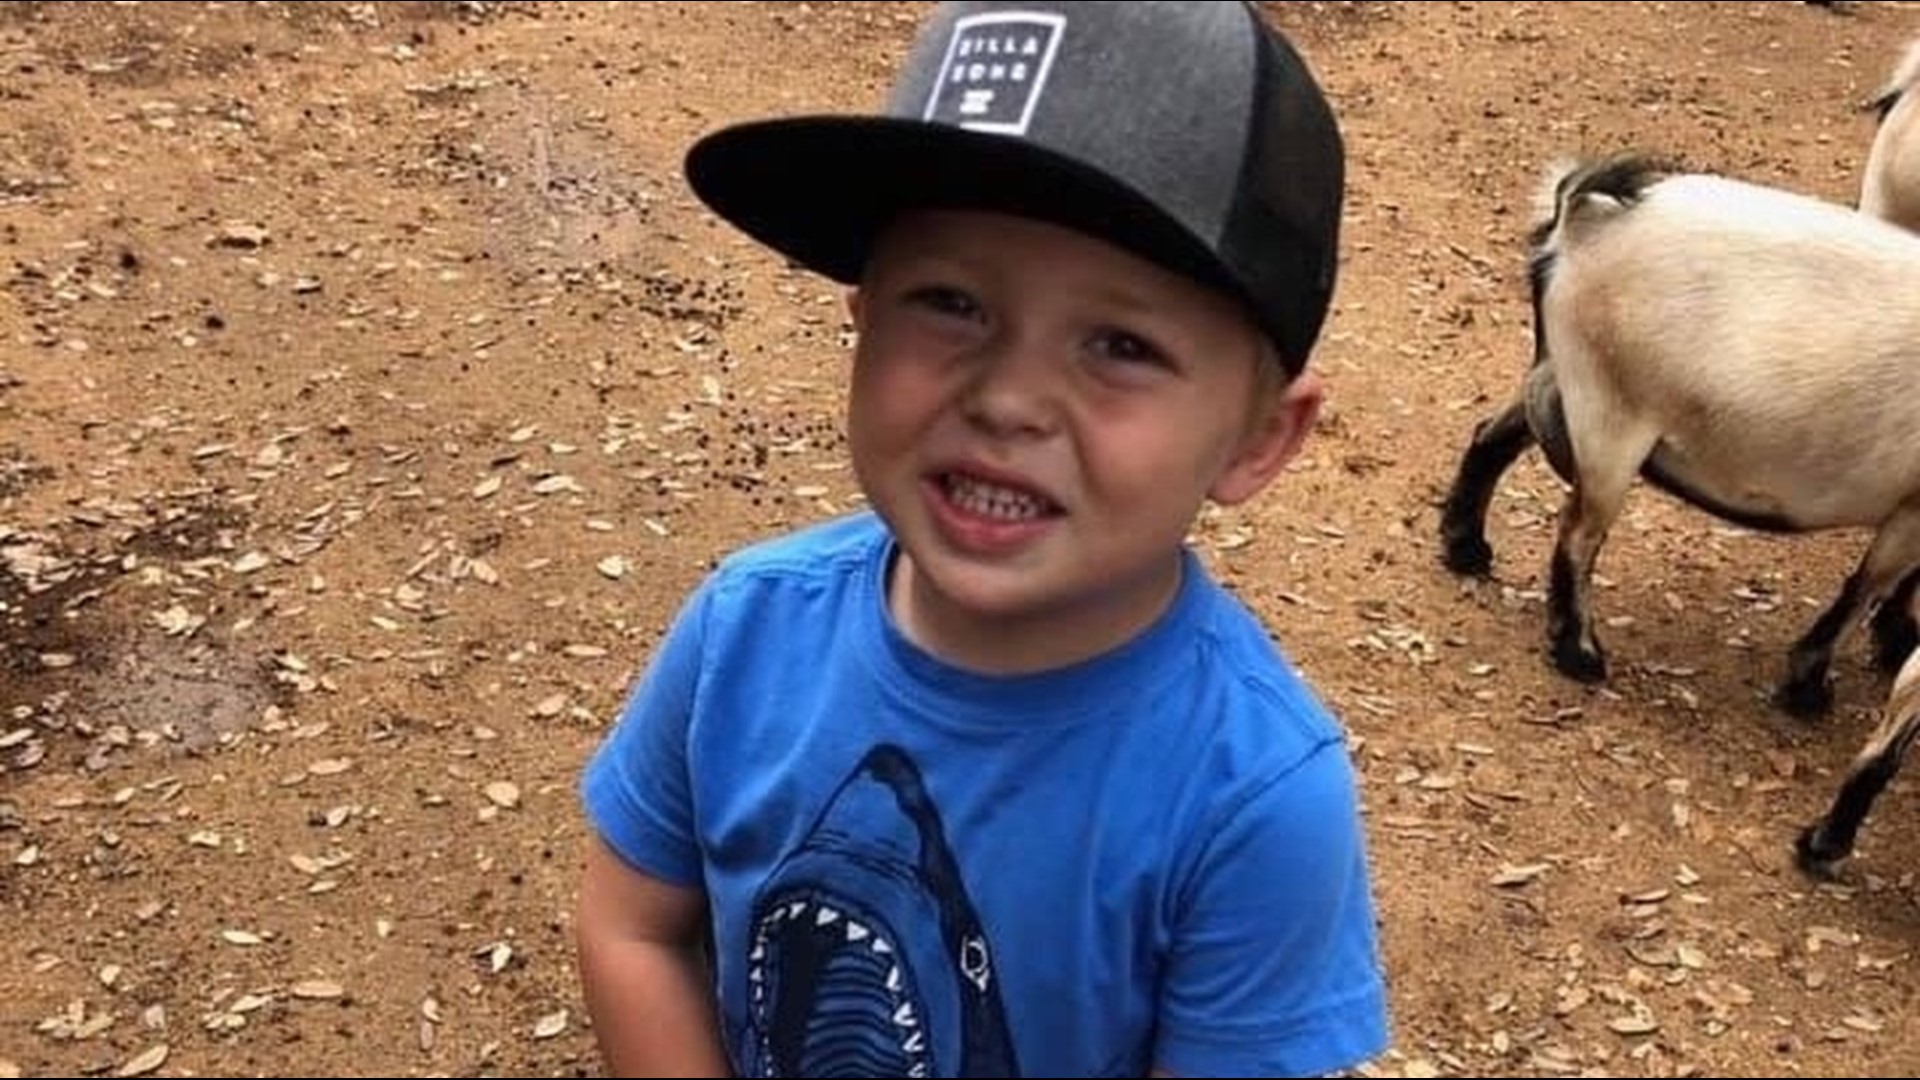 The 4-year-old boy has been in the hospital since his stepfather shot him last December in a double-murder suicide.